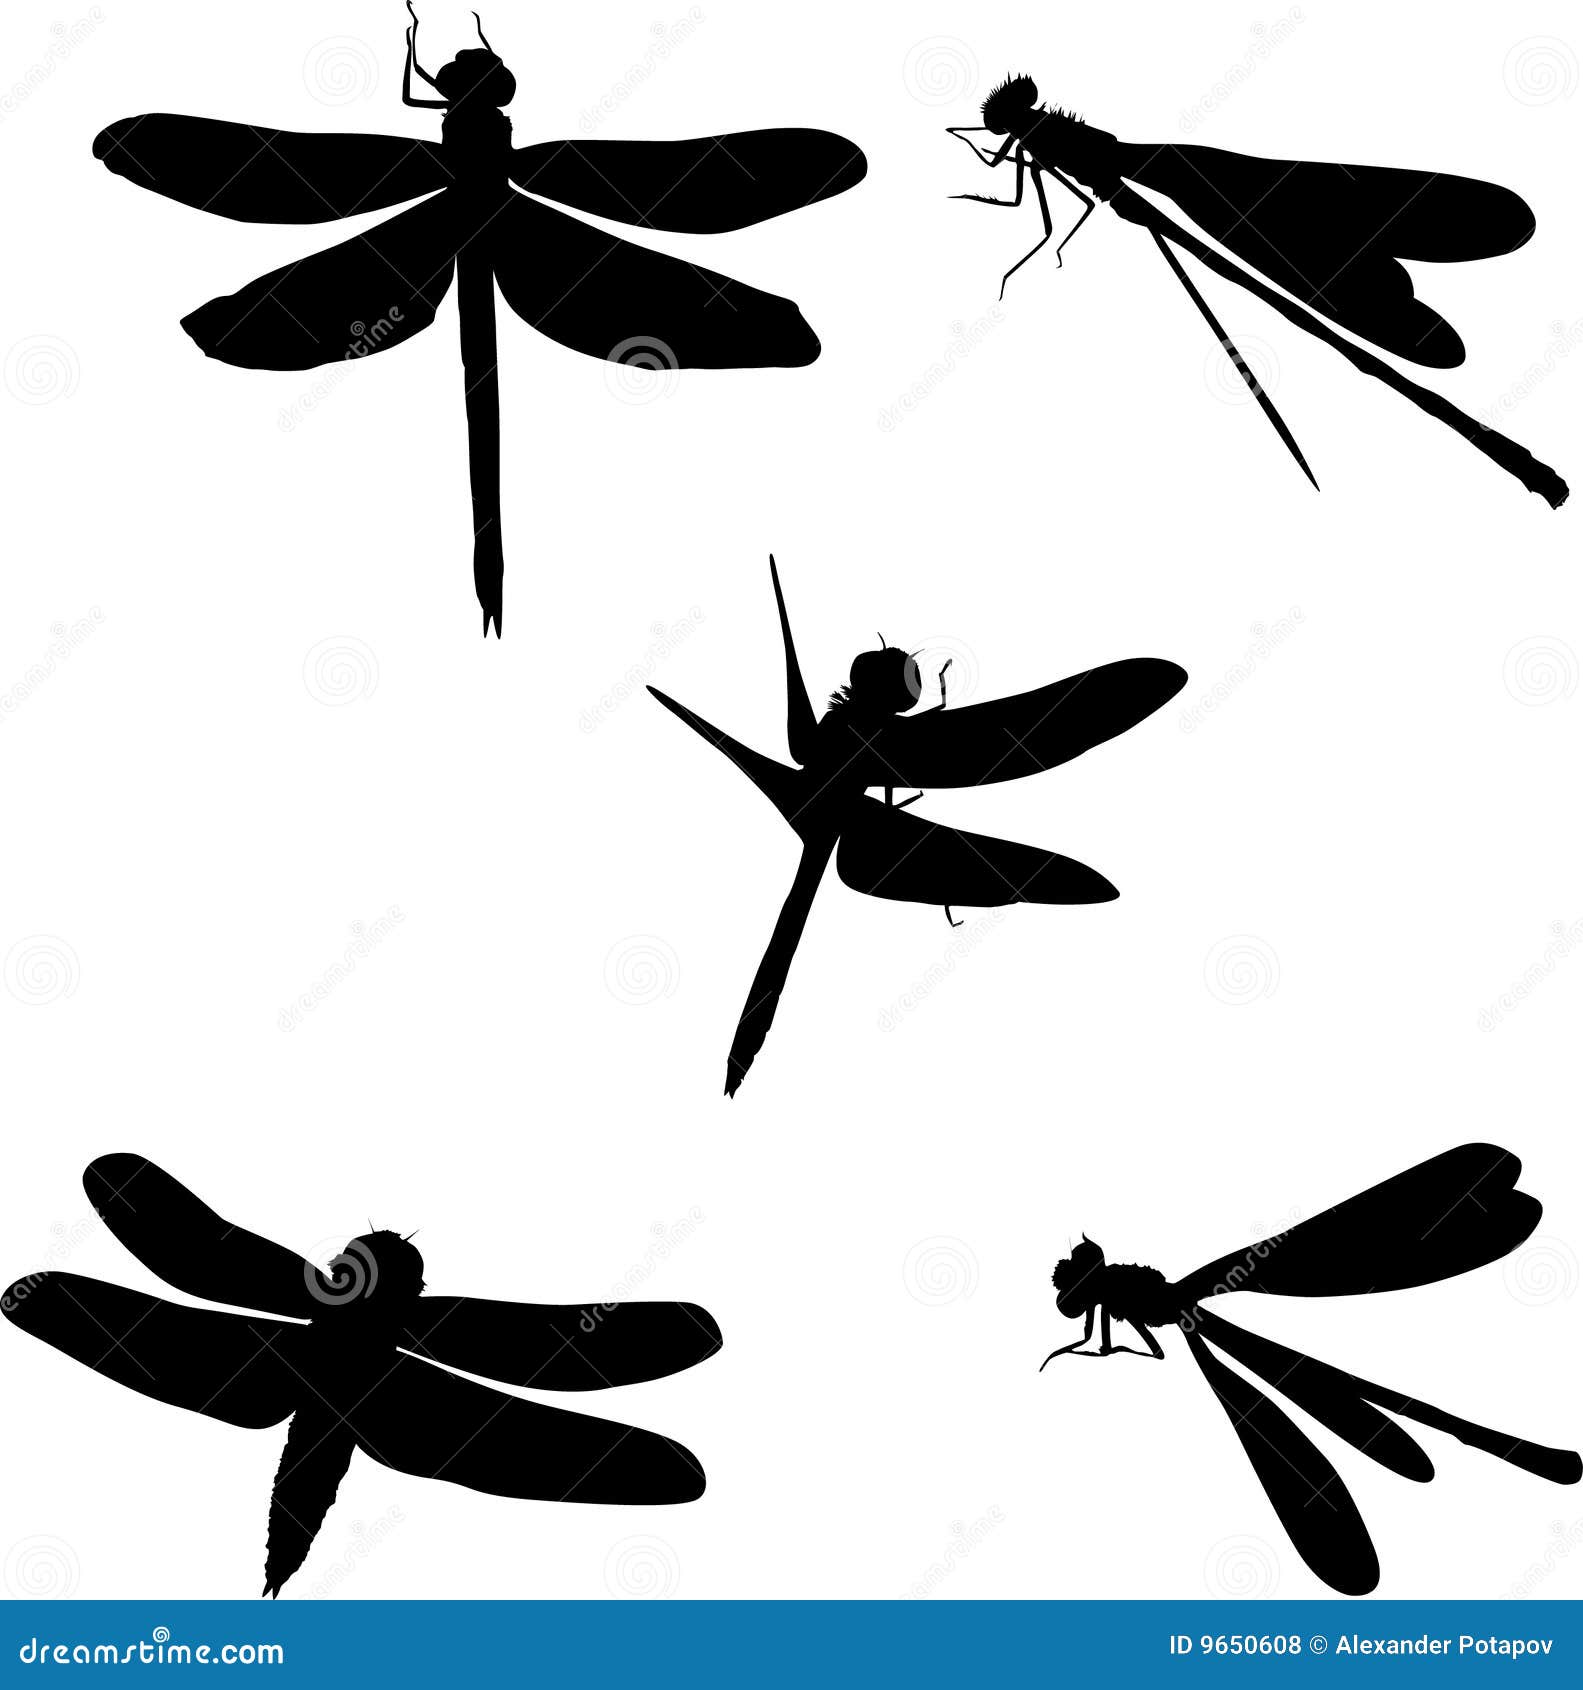 Five Dragonfly Silhouettes Royalty Free Stock Photos ...